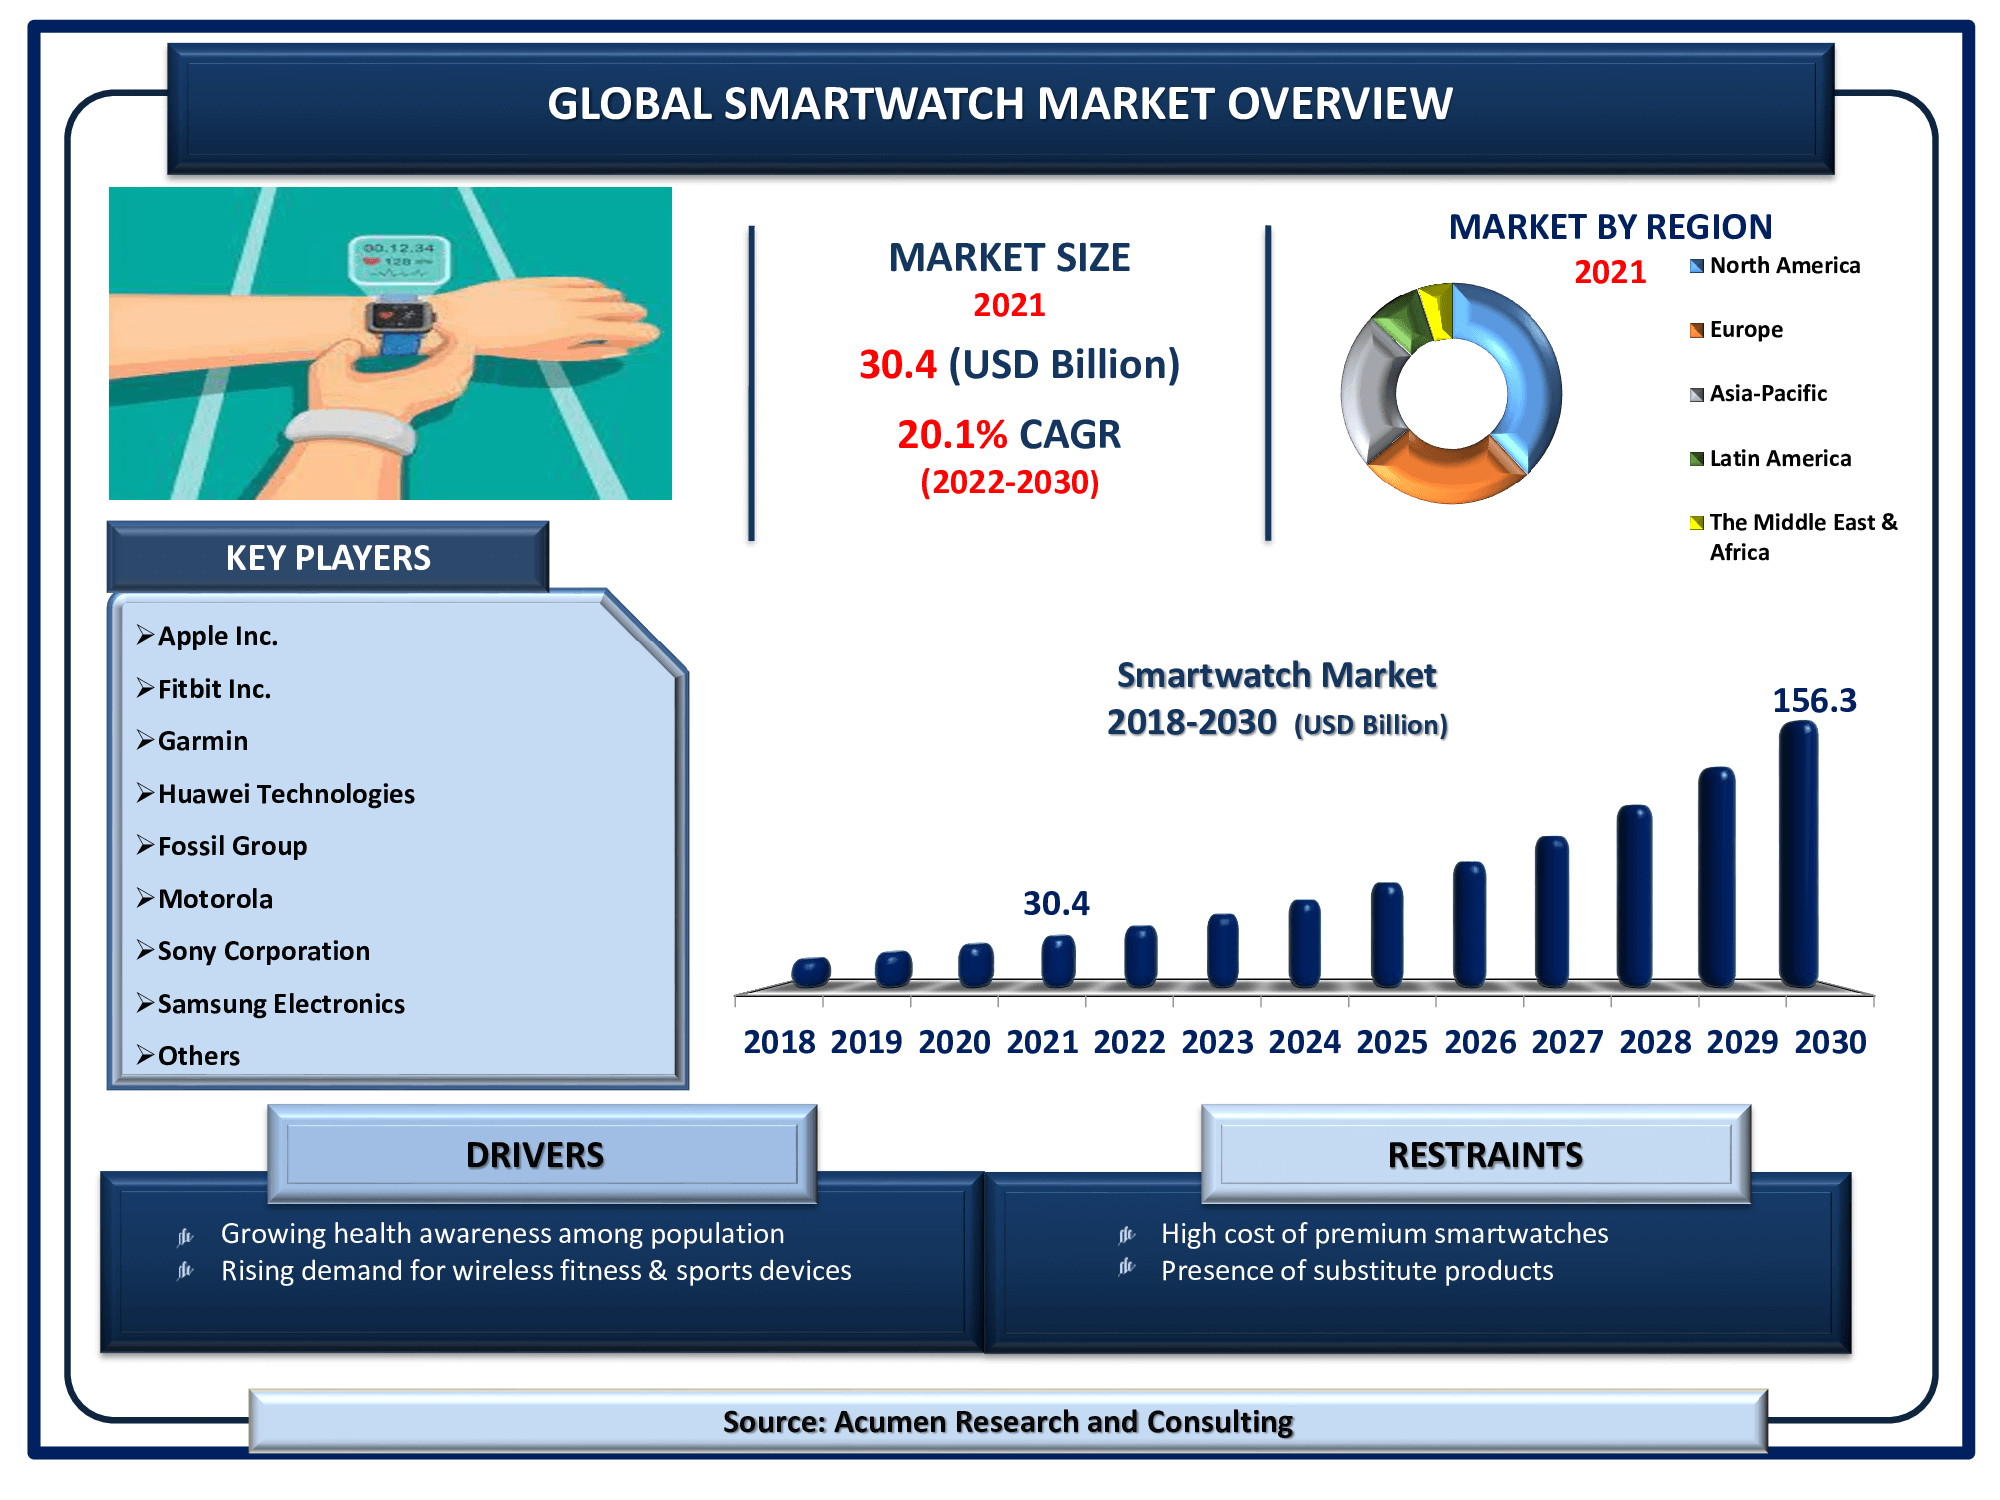 The Global Smartwatch Market Size accounted for USD 30.4 Billion in 2021 and is estimated to achieve a market size of USD 156.3 Billion by 2030 growing at a CAGR of 20.1% from 2022 to 2030.